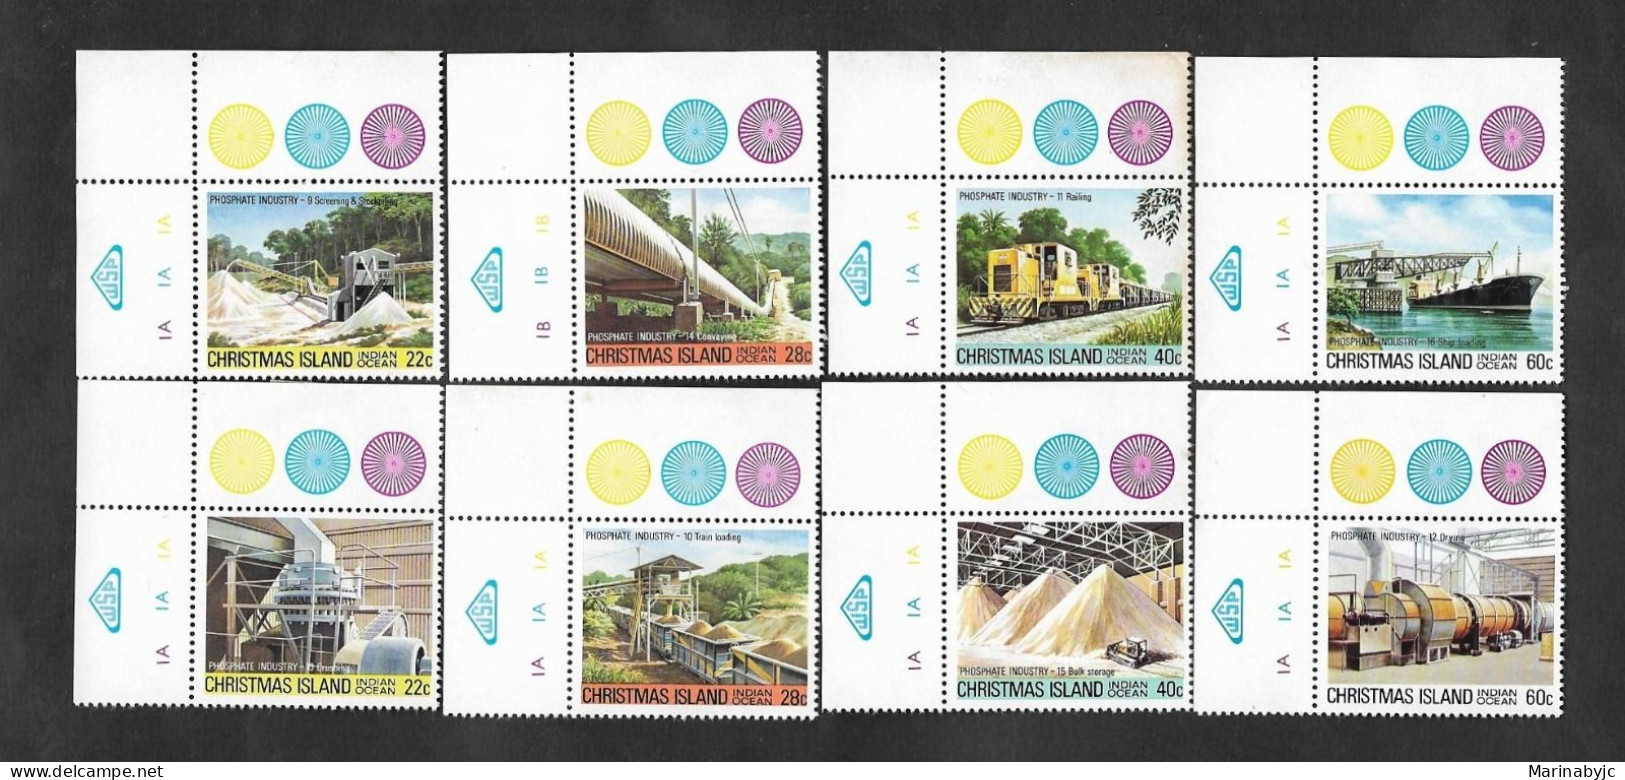 SD)1981 CHRISTMAS ISLAND FROM THE PHOSPHATE INDUSTRY SERIES, 8 STAMPS CECA - Christmas Island